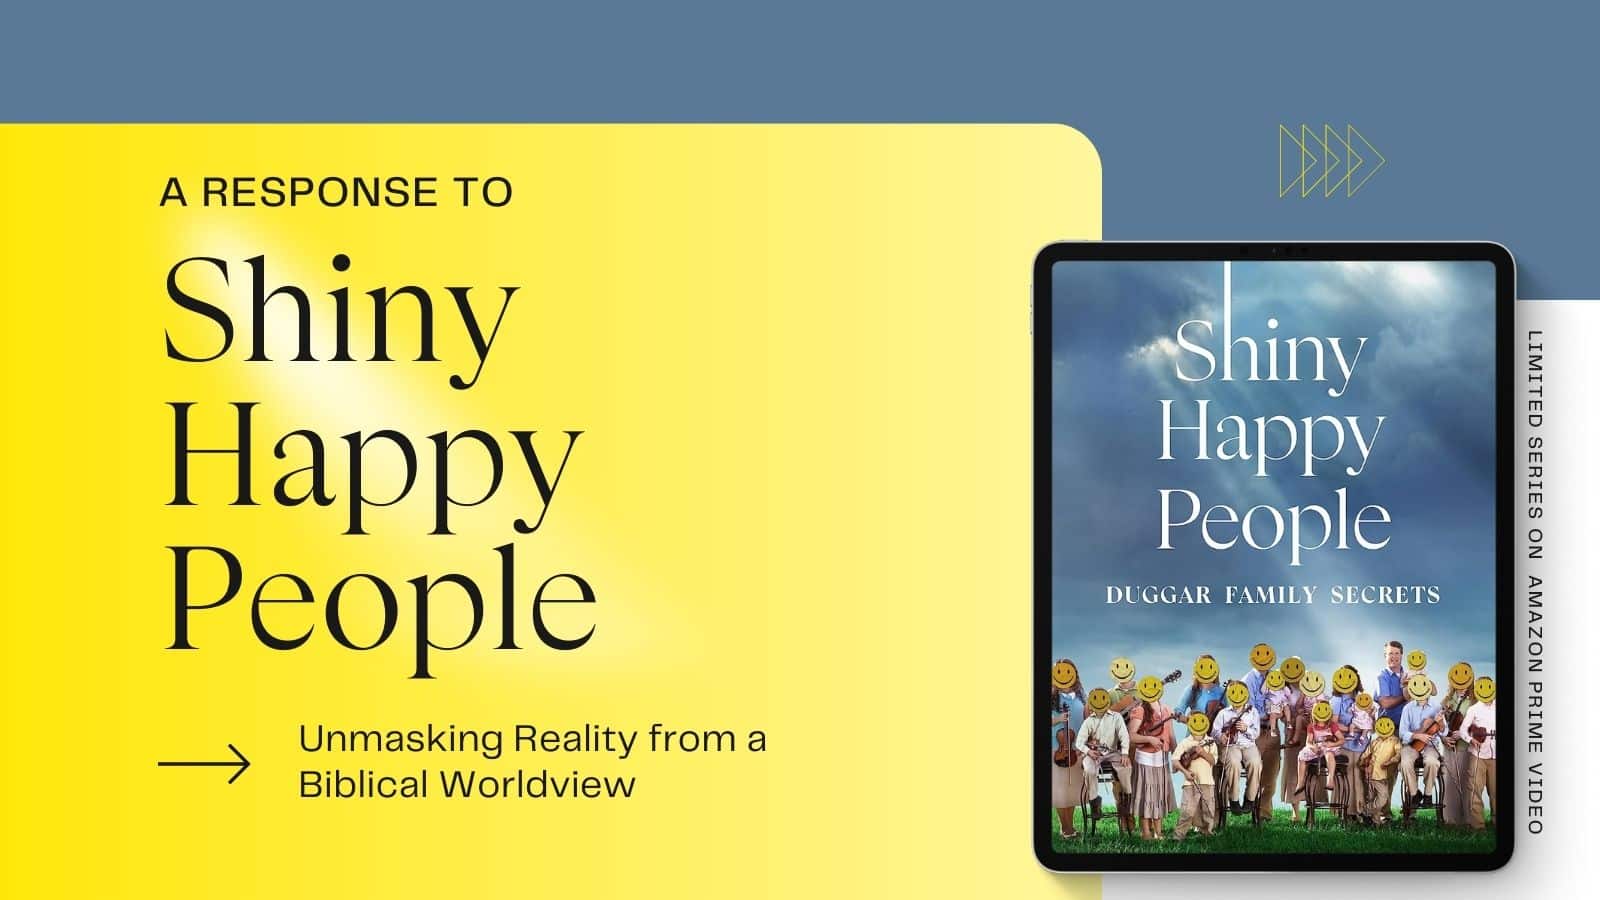 A Response to “Shiny Happy People”